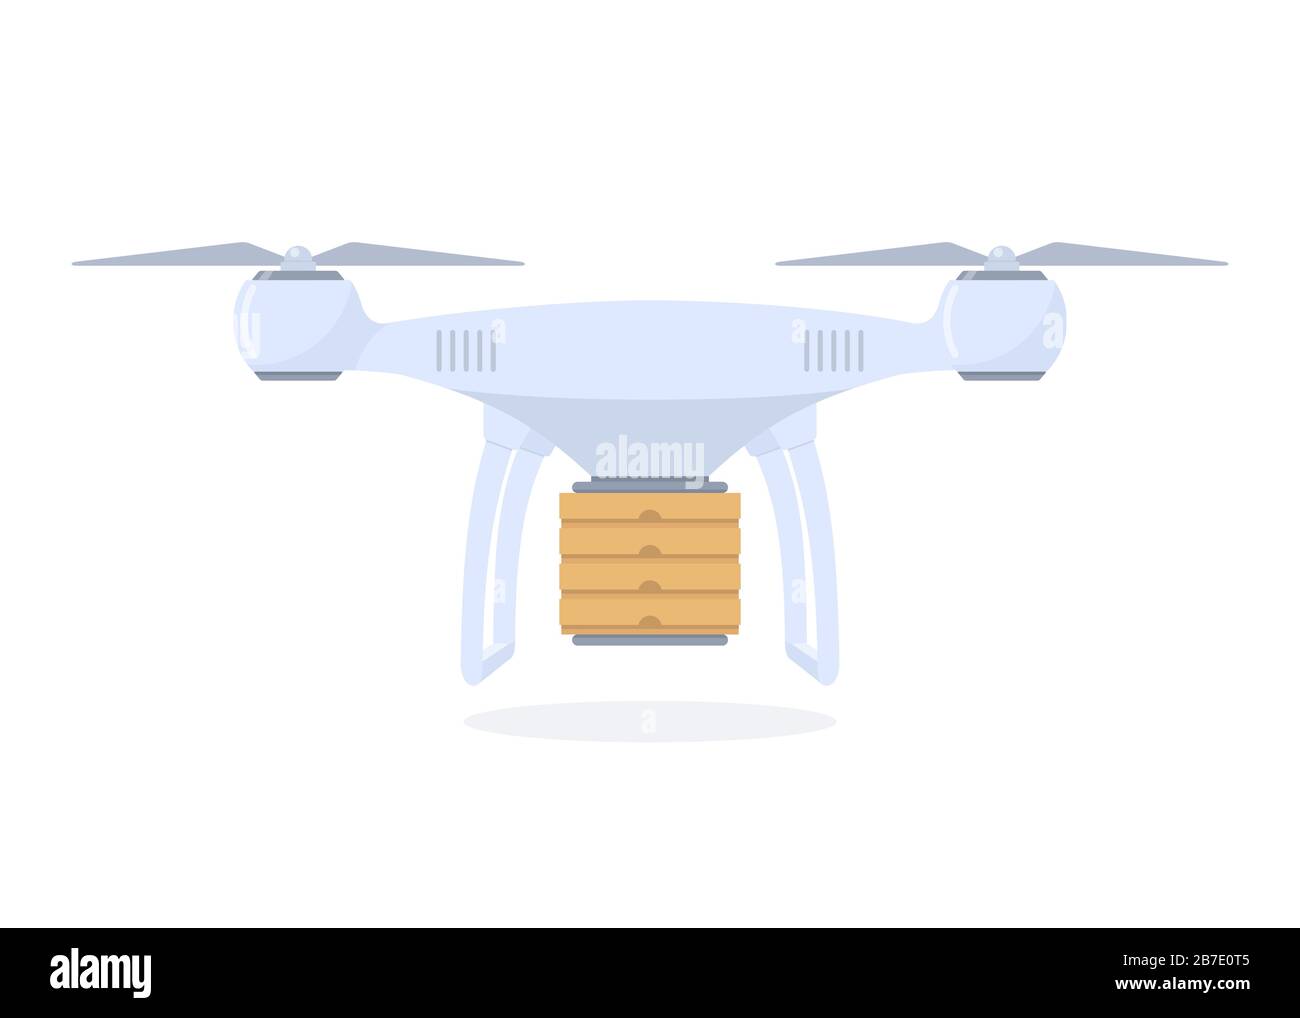 Drone delivery concept illustration. Delivery quadrocopter with pizza boxes. Vector illustration in flat style Stock Vector